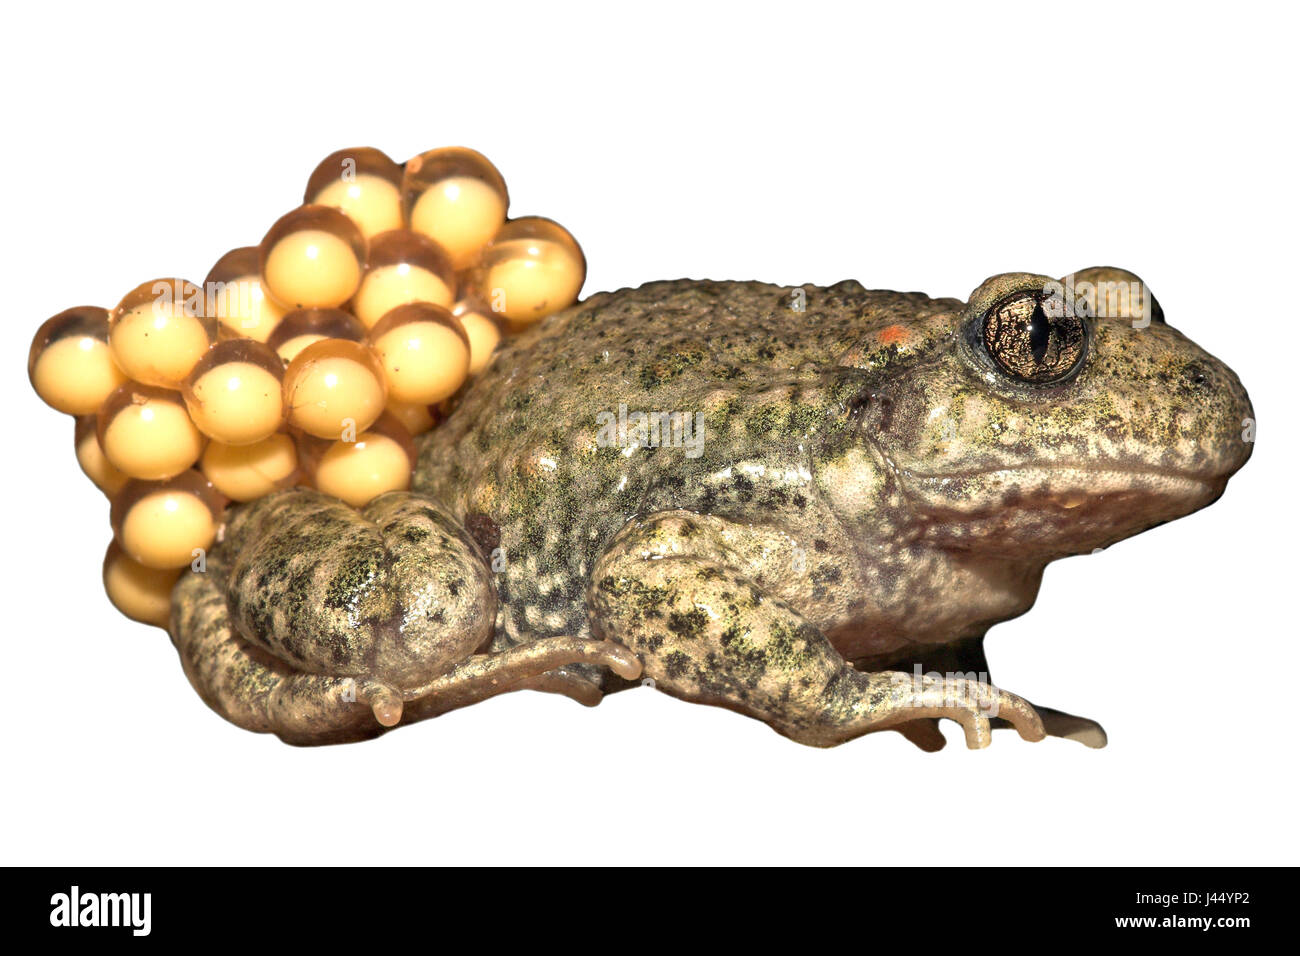 Common midwife toad with eggs against a white background (rendered) Stock Photo